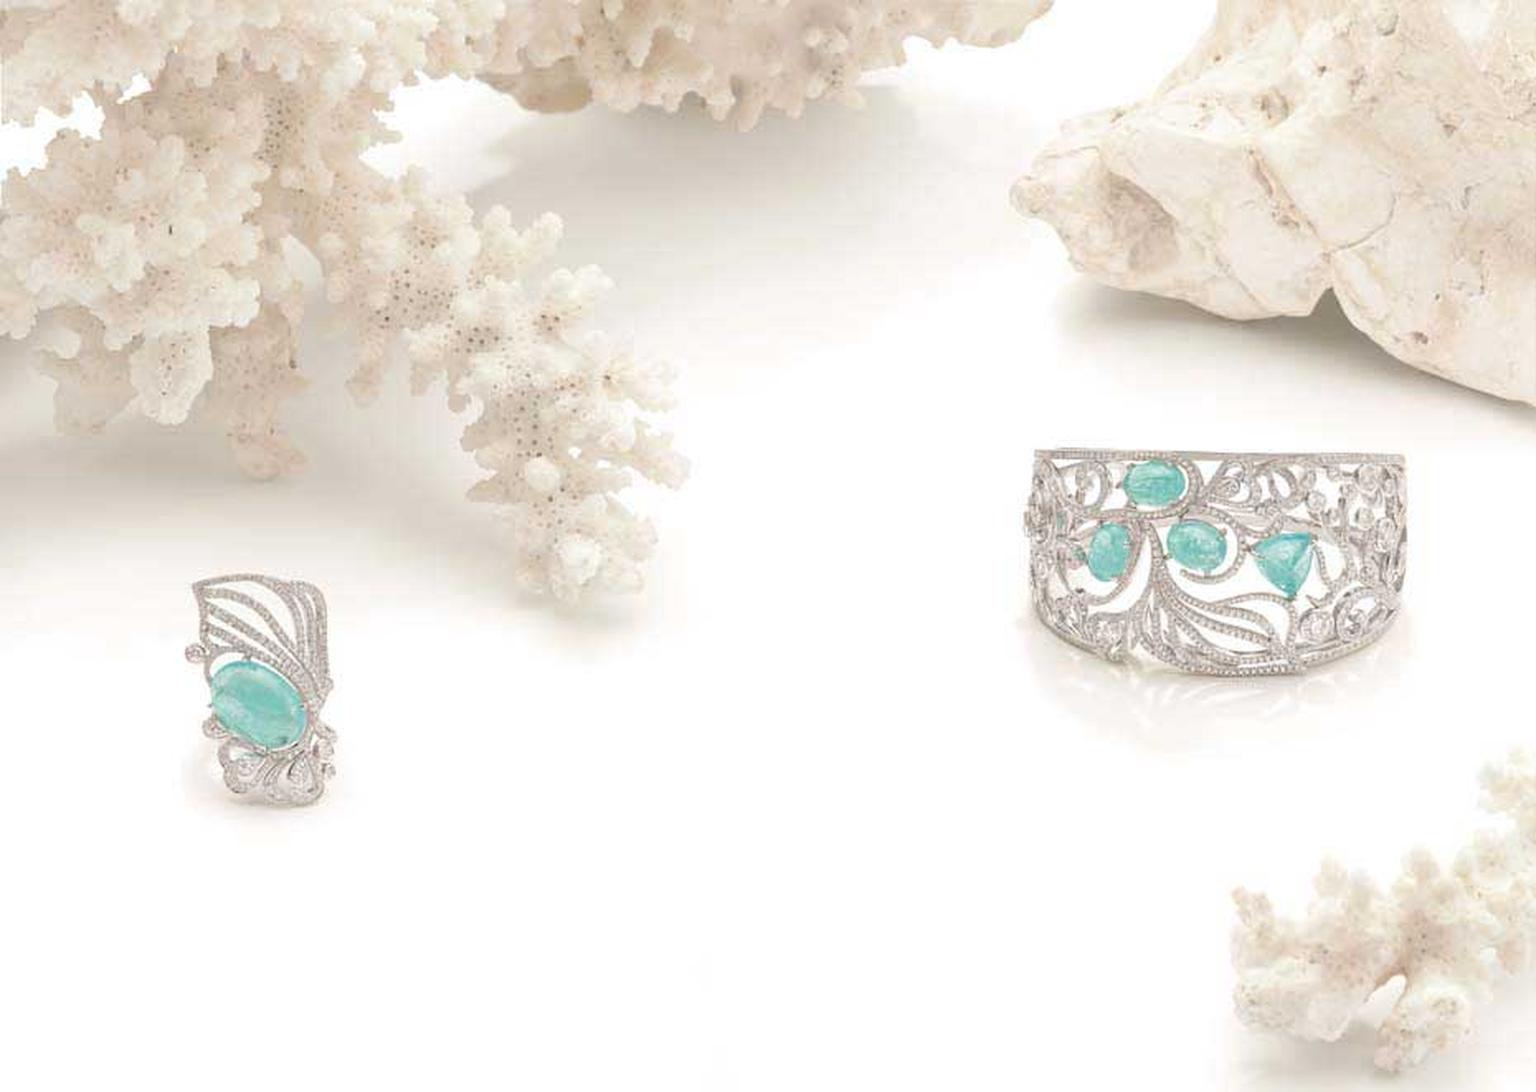 Boodles Atlantic Blue cuff and ring with Paraiba tourmalines and diamonds, from the new 'Ocean of Dreams' collection.